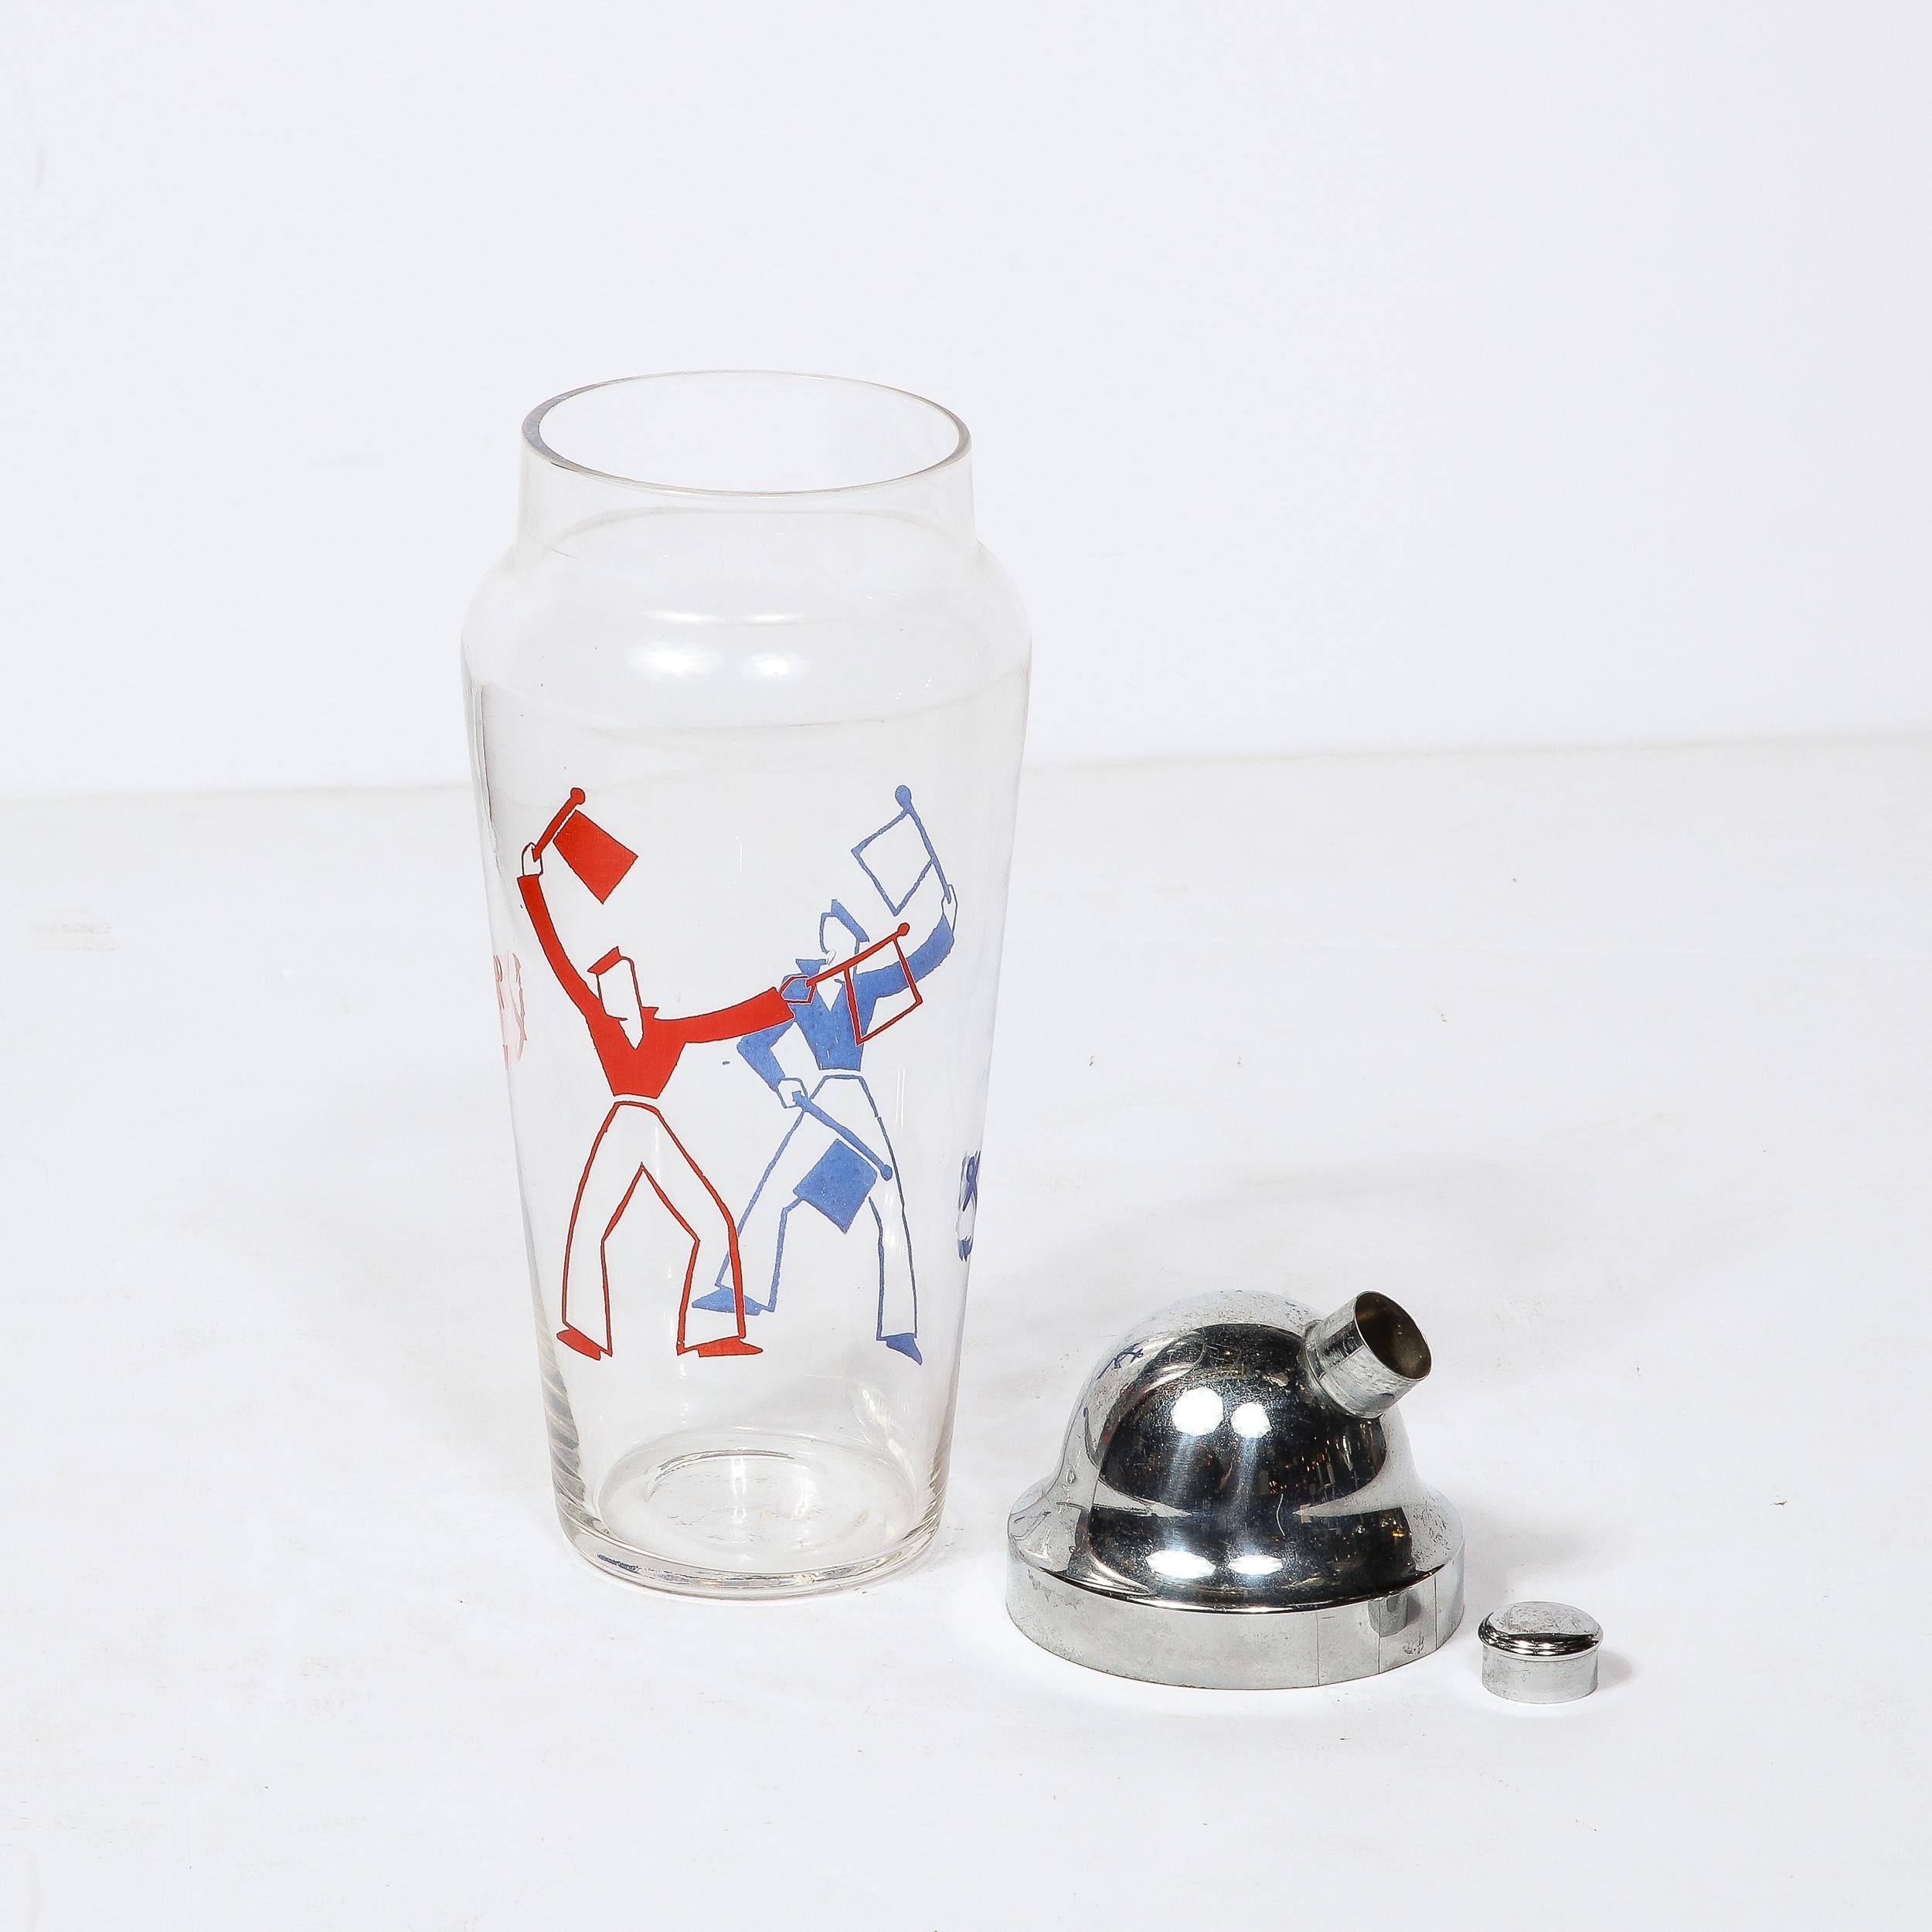 Art Deco Whimsical Cocktail Shaker in Chrome with Sailors in Red and Blue  6